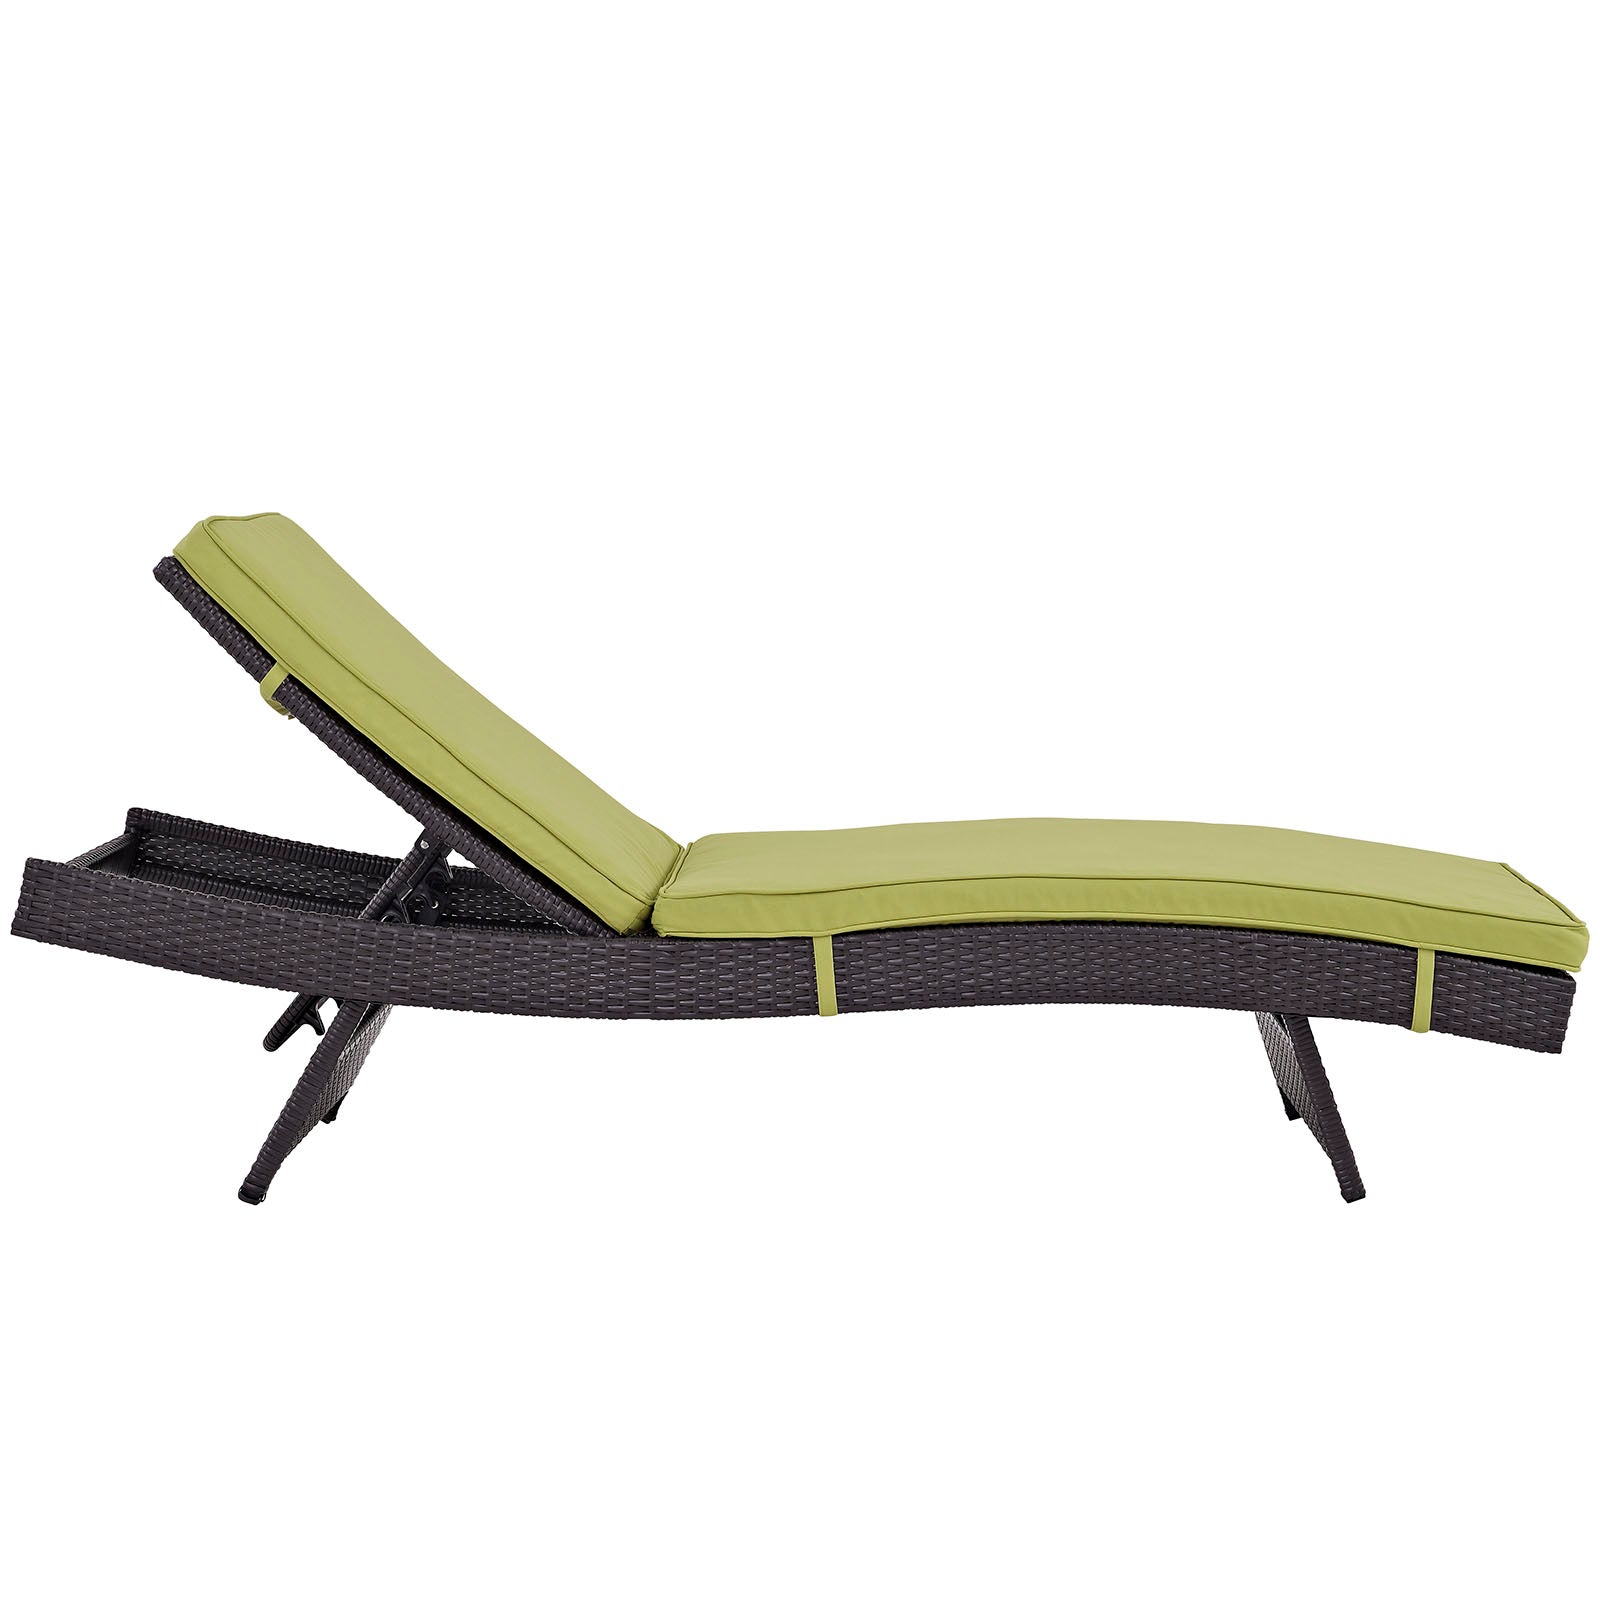 Convene Chaise Outdoor Patio Set of 2 - East Shore Modern Home Furnishings